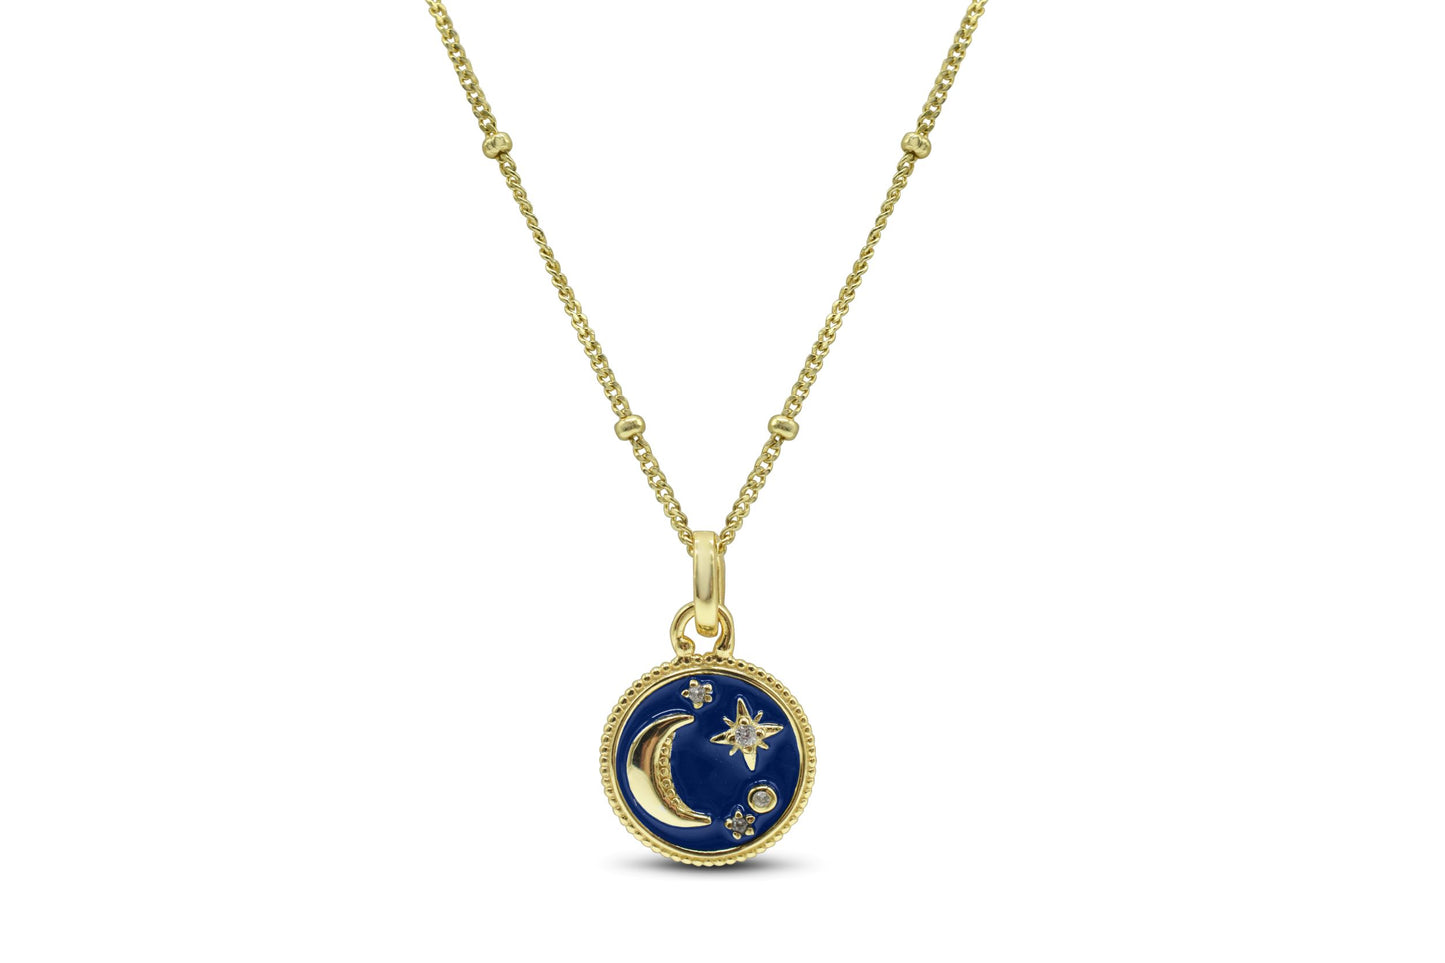 Lovable Lacquer Necklace - Night Sky